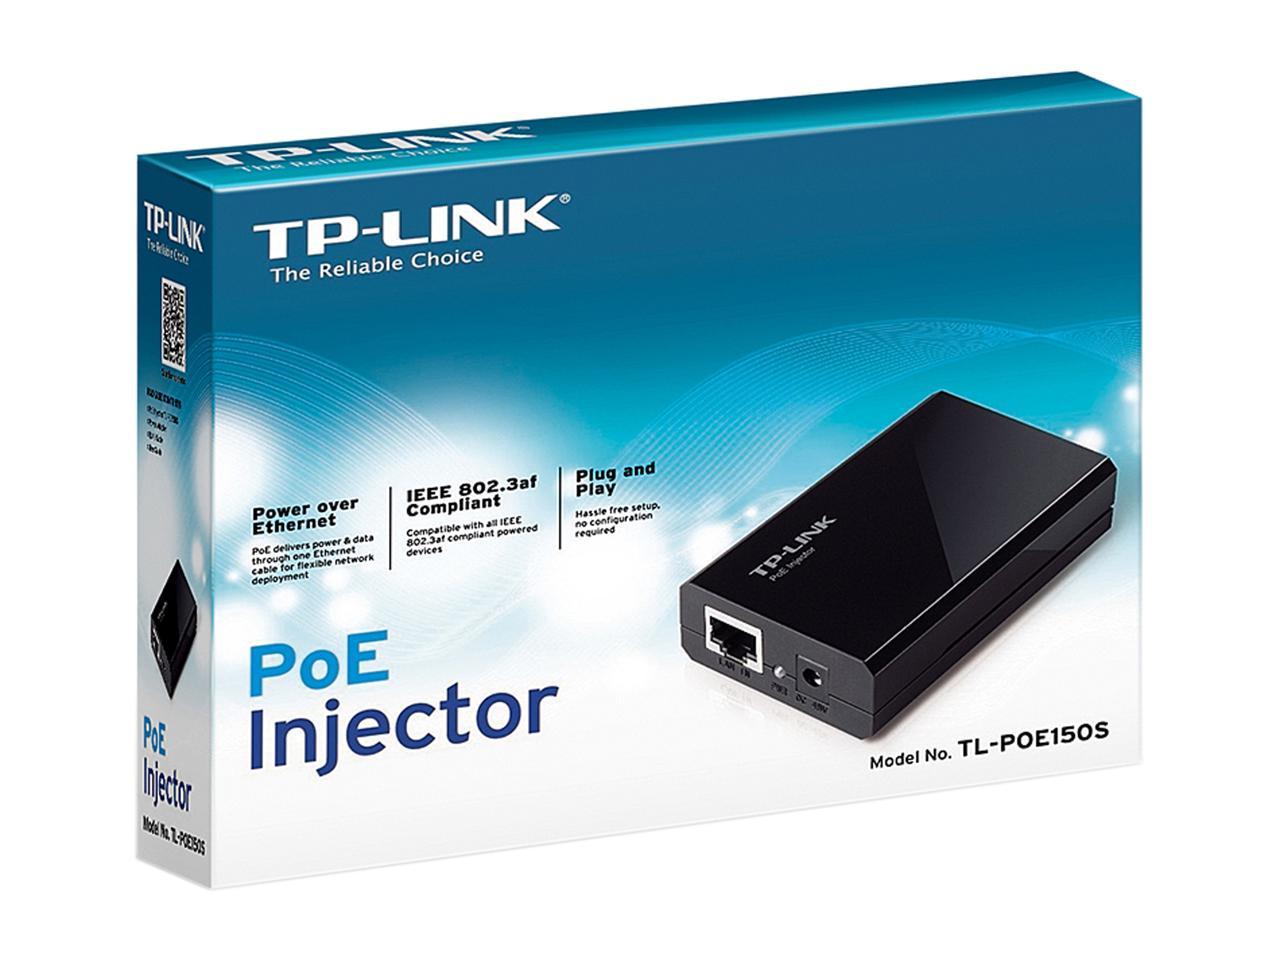 | Plug & Play PoE++ | UL Certified Non-PoE to PoE Adapter Desktop/Wall-Mount TP-Link TL-PoE170S Supplies up to 60W Black 802.3at/af/bt Gigabit PoE Injector Distance Up to 328 ft 